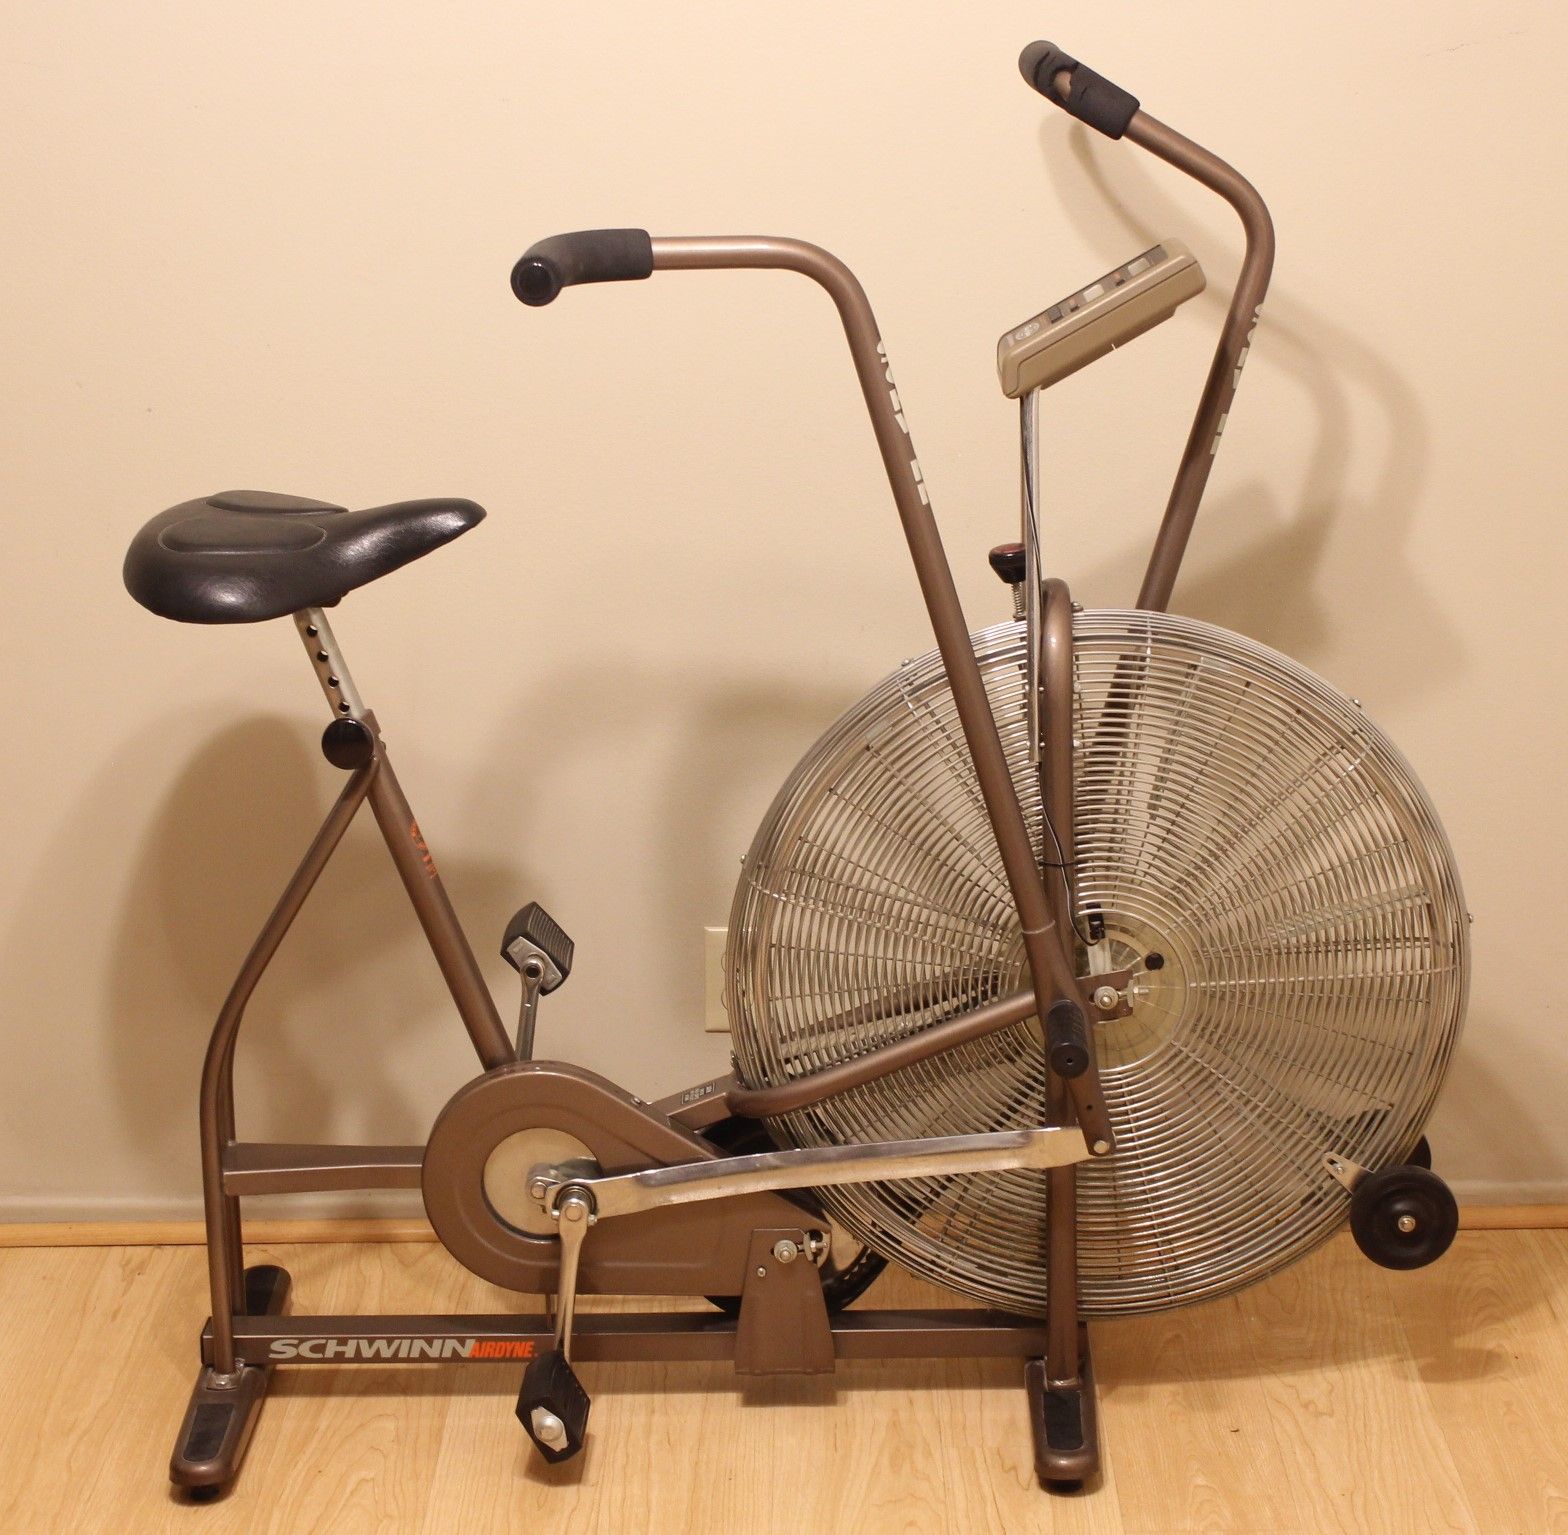 Schwinn Airdyne Upright Bike Indoor Stationary Fan Bicycle Cycling Exercise Fitness Crossfit Vintage